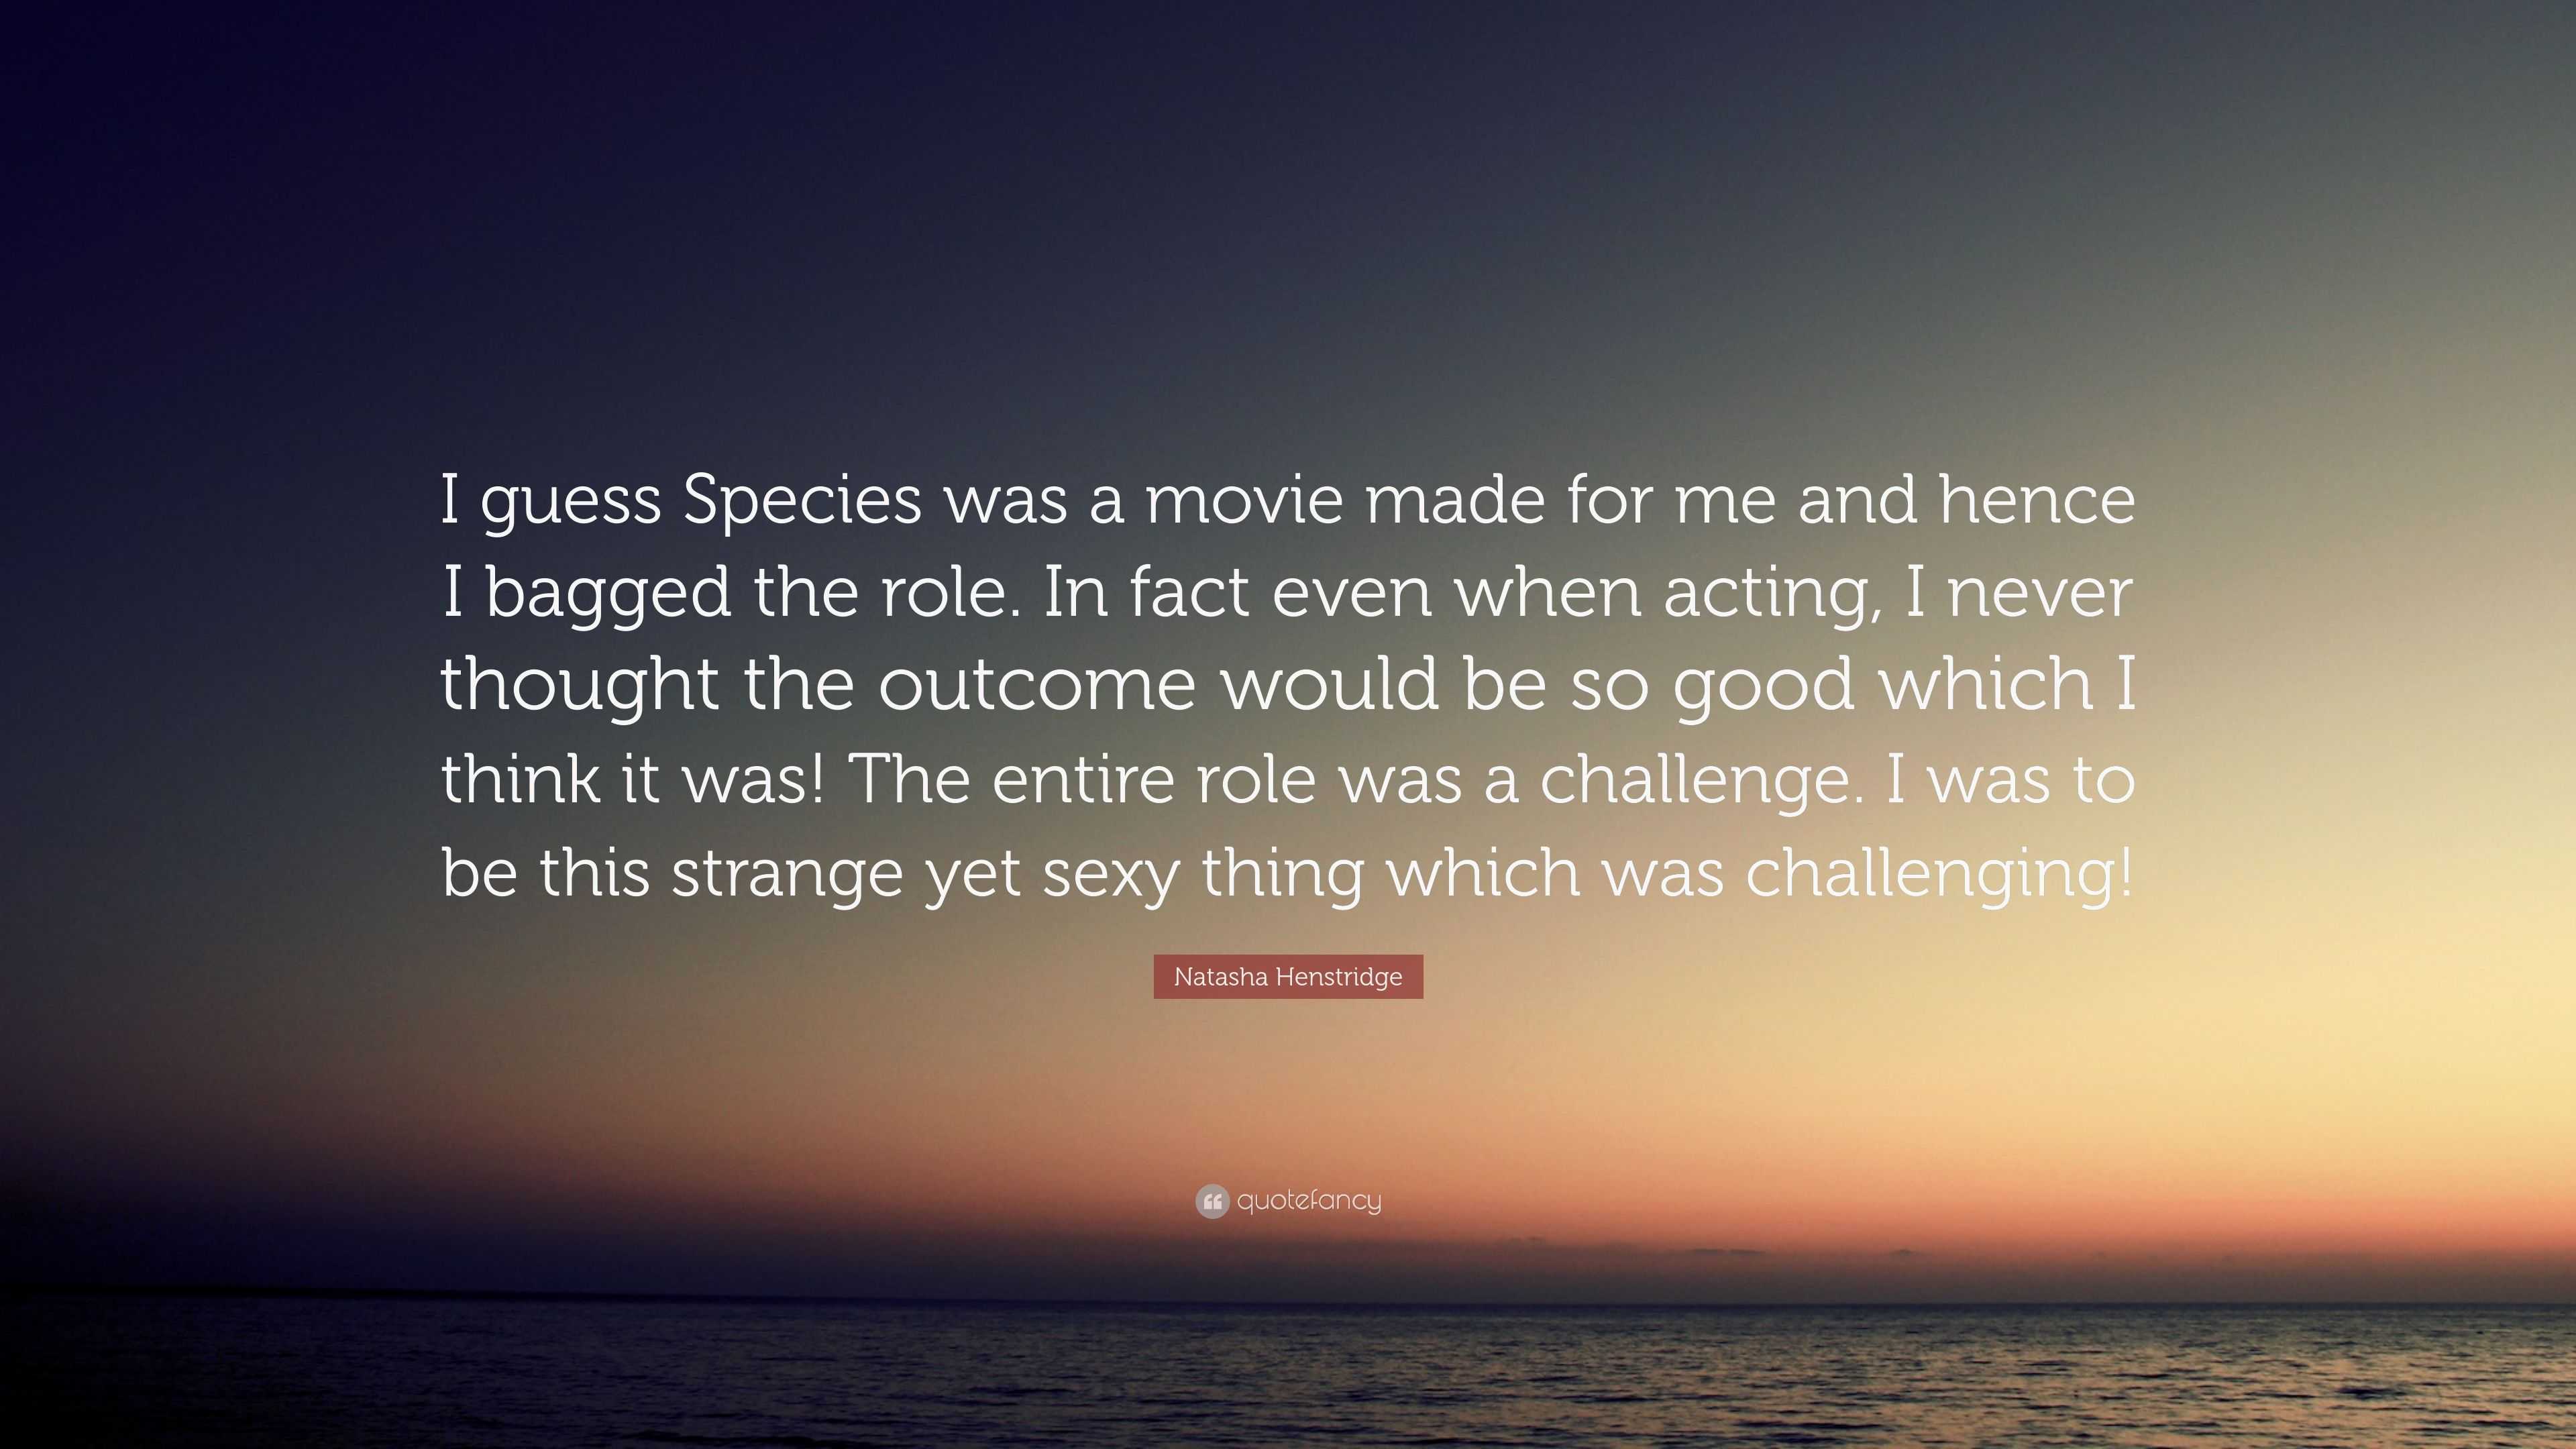 Natasha Henstridge Quote: “I guess Species was a movie made for me and  hence I bagged the role. In fact even when acting, I never thought the  outco”